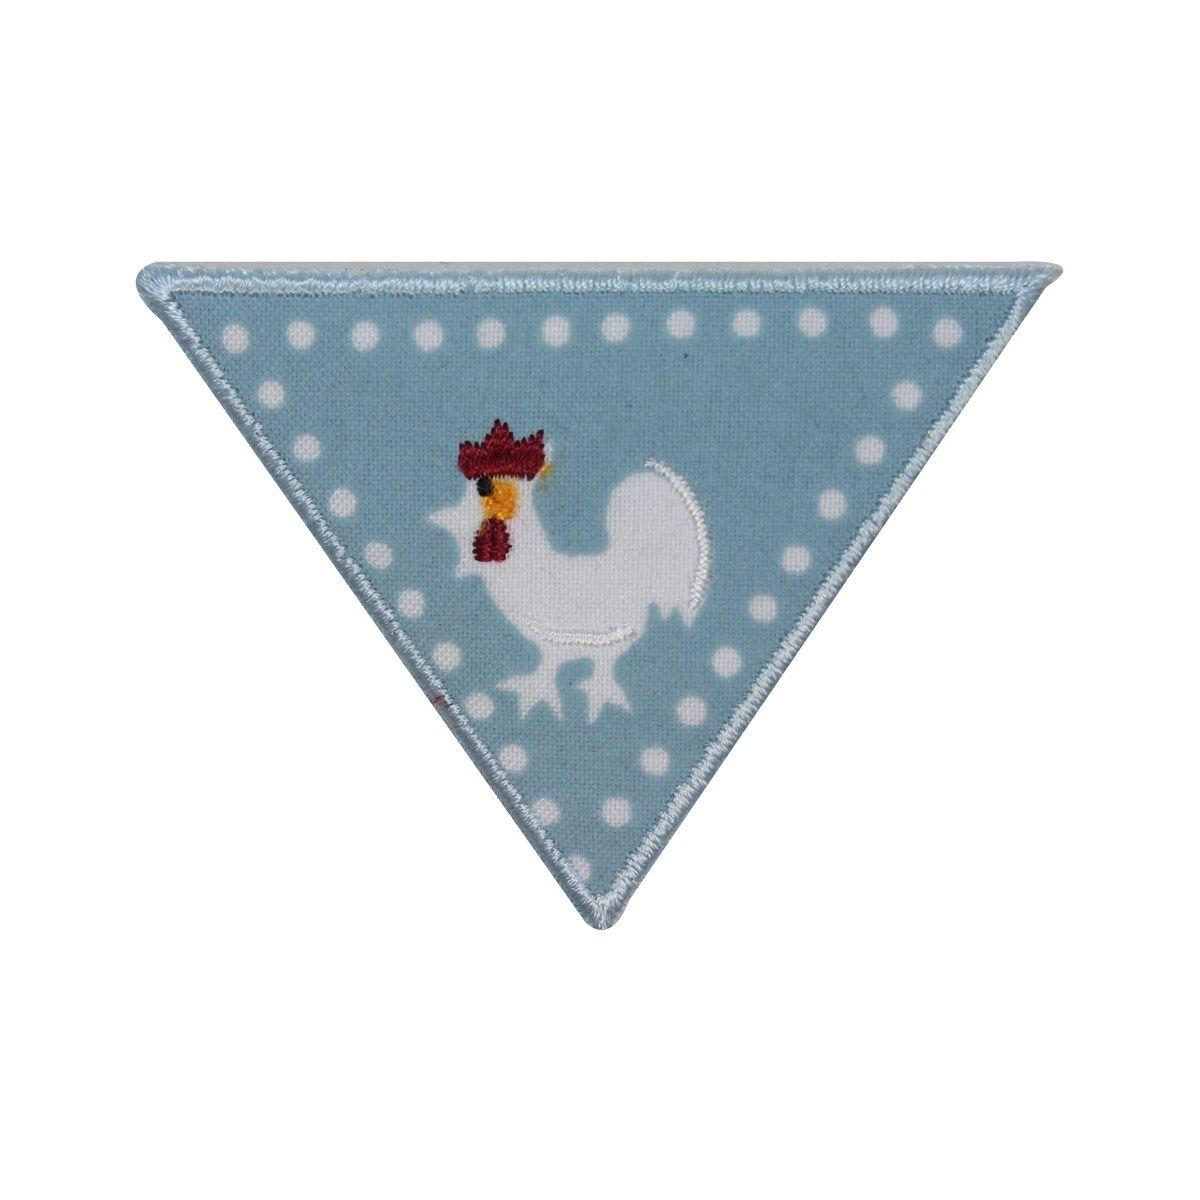 Blue Rooster in Triangle Logo - ID 3119 Triangle Badge Rooster Patch Chicken Emblem Embroidered Iron ...